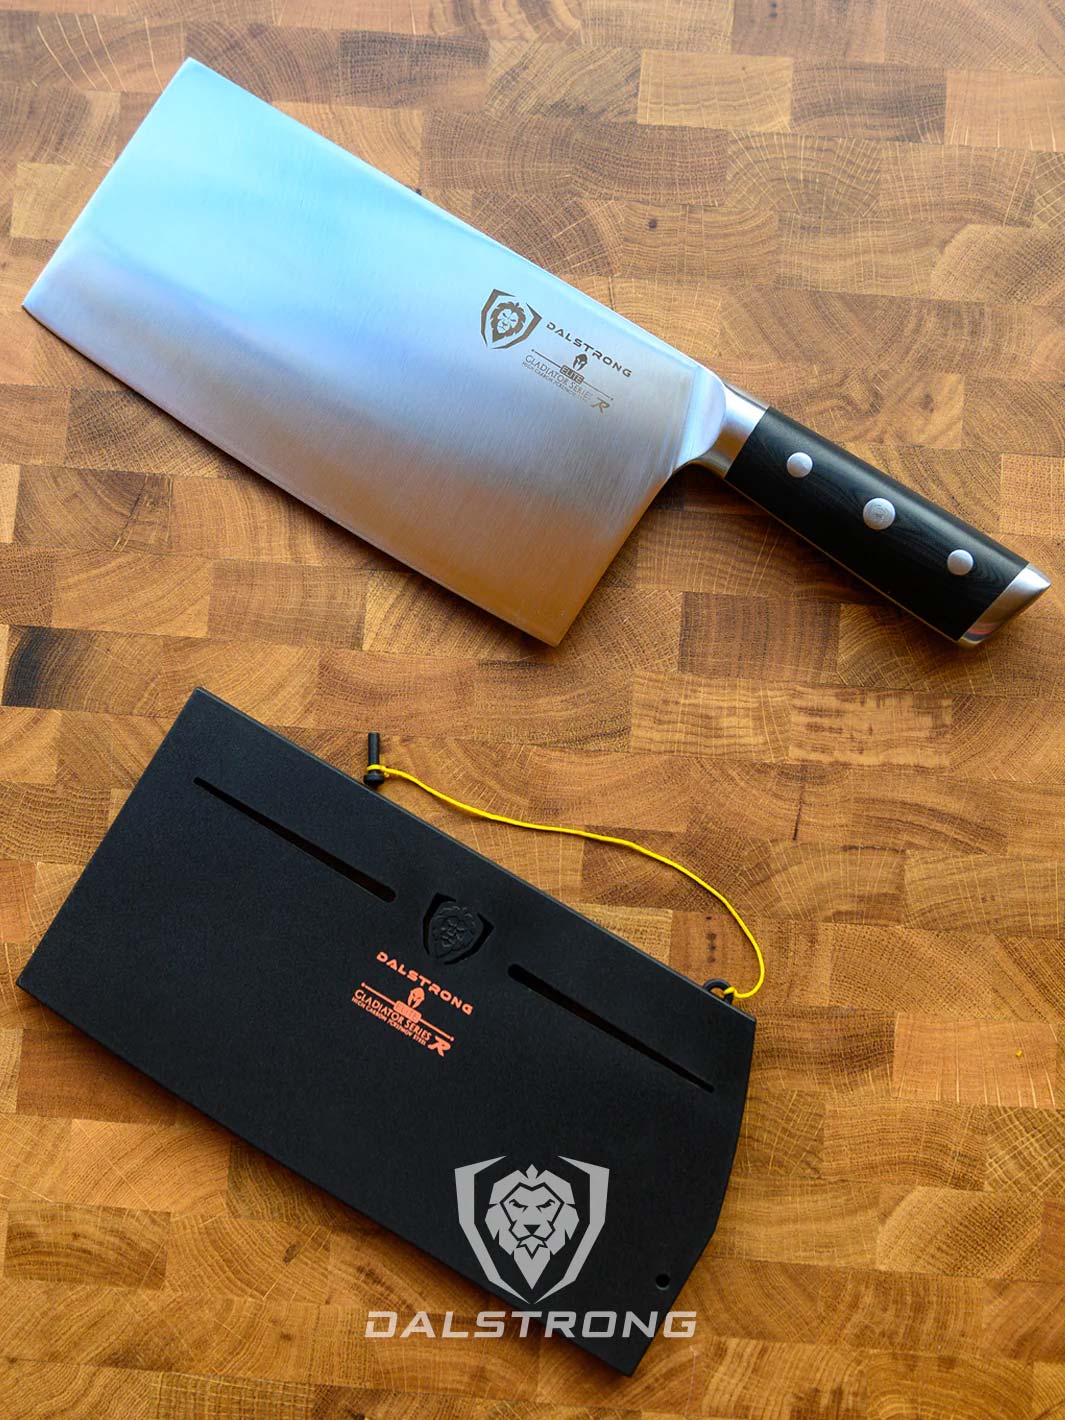 Dalstrong gladiator series 9 inch chinese cleaver with black handle and sheath on top of a cutting board.